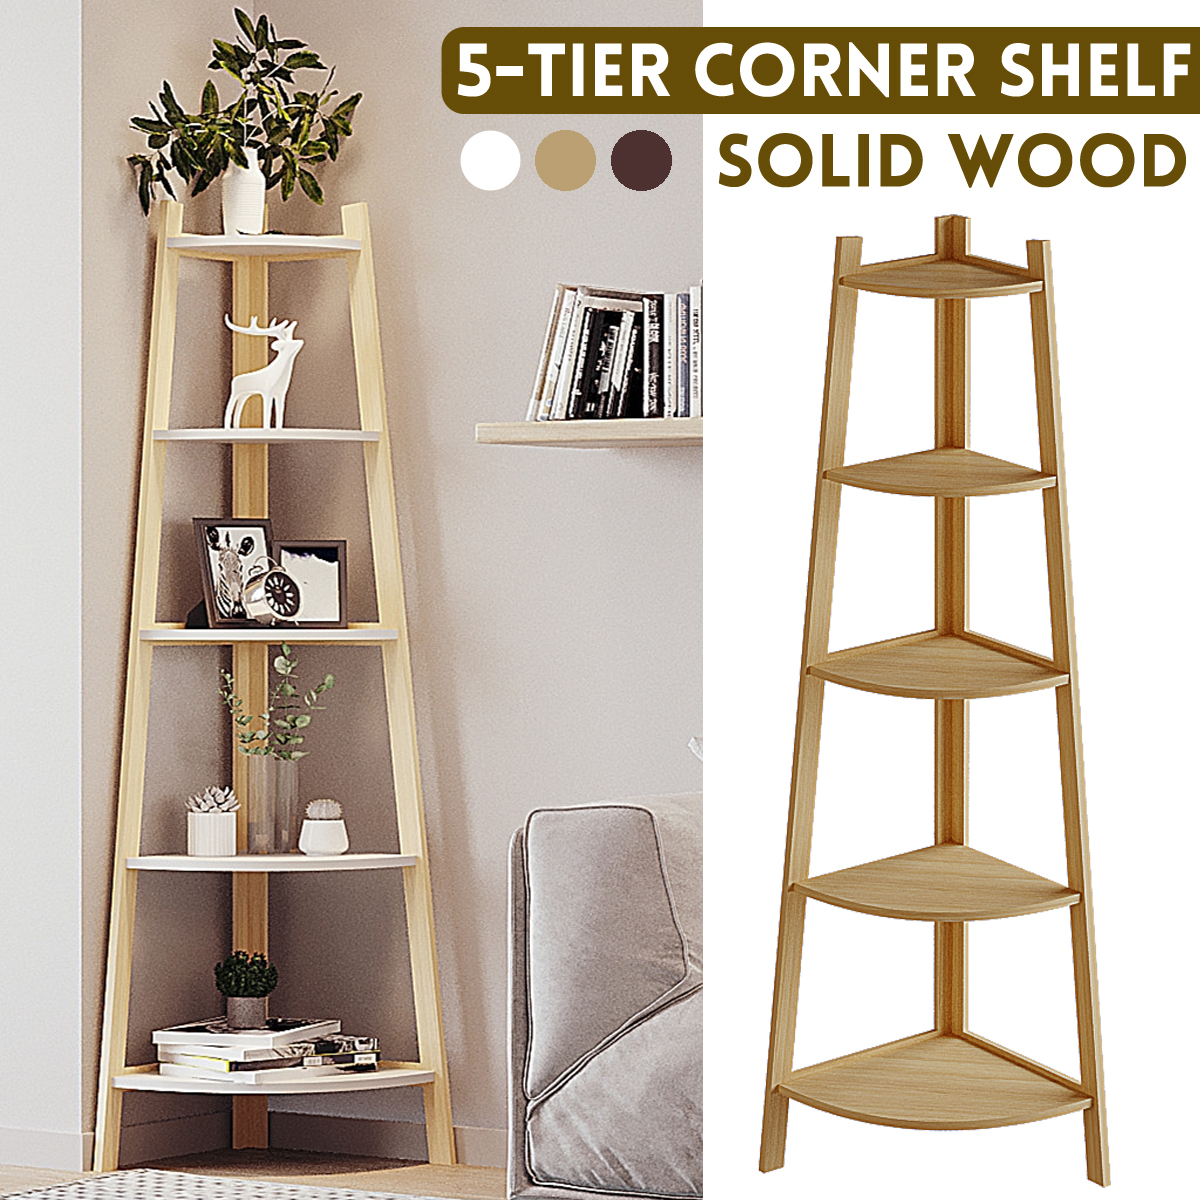 Stylish-Corner-Ladder-Shelving-Unit-5-Tier-Wall-Leaning-Bookcase-Storage-Display-Book-Accessories-St-1840067-1